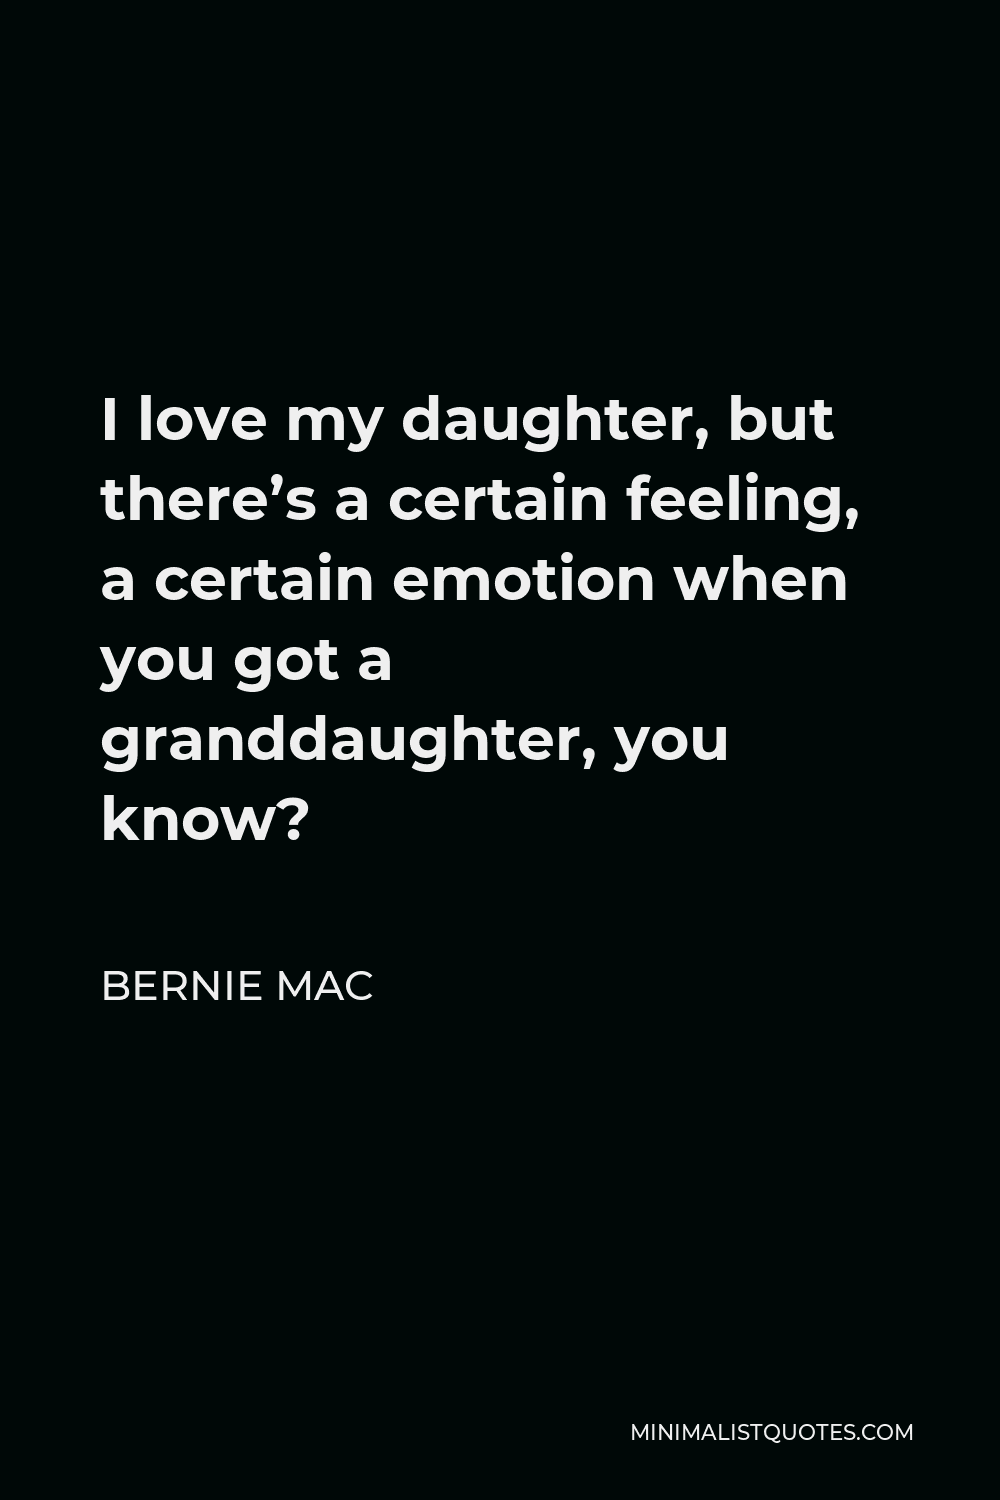 Bernie Mac Quote - I love my daughter, but there’s a certain feeling, a certain emotion when you got a granddaughter, you know?